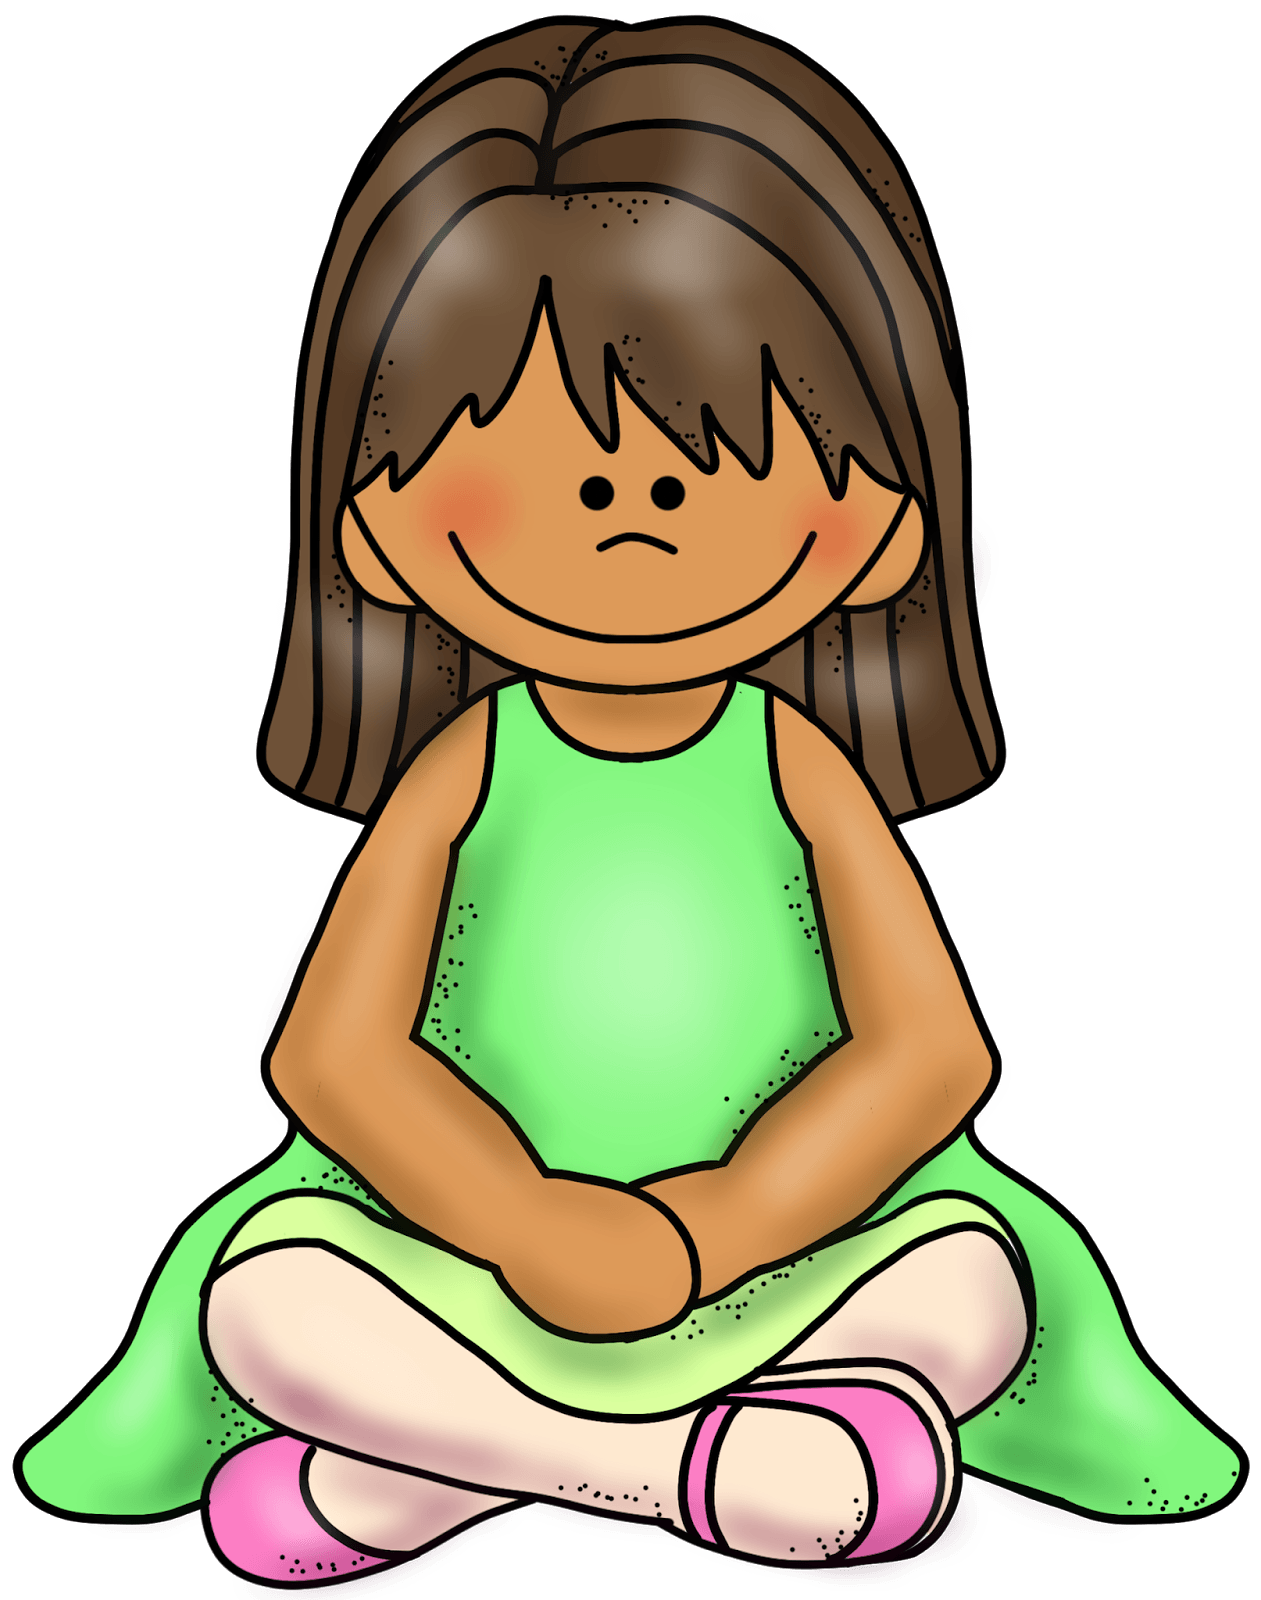 Sit sat chair story. Floor clipart child reading book